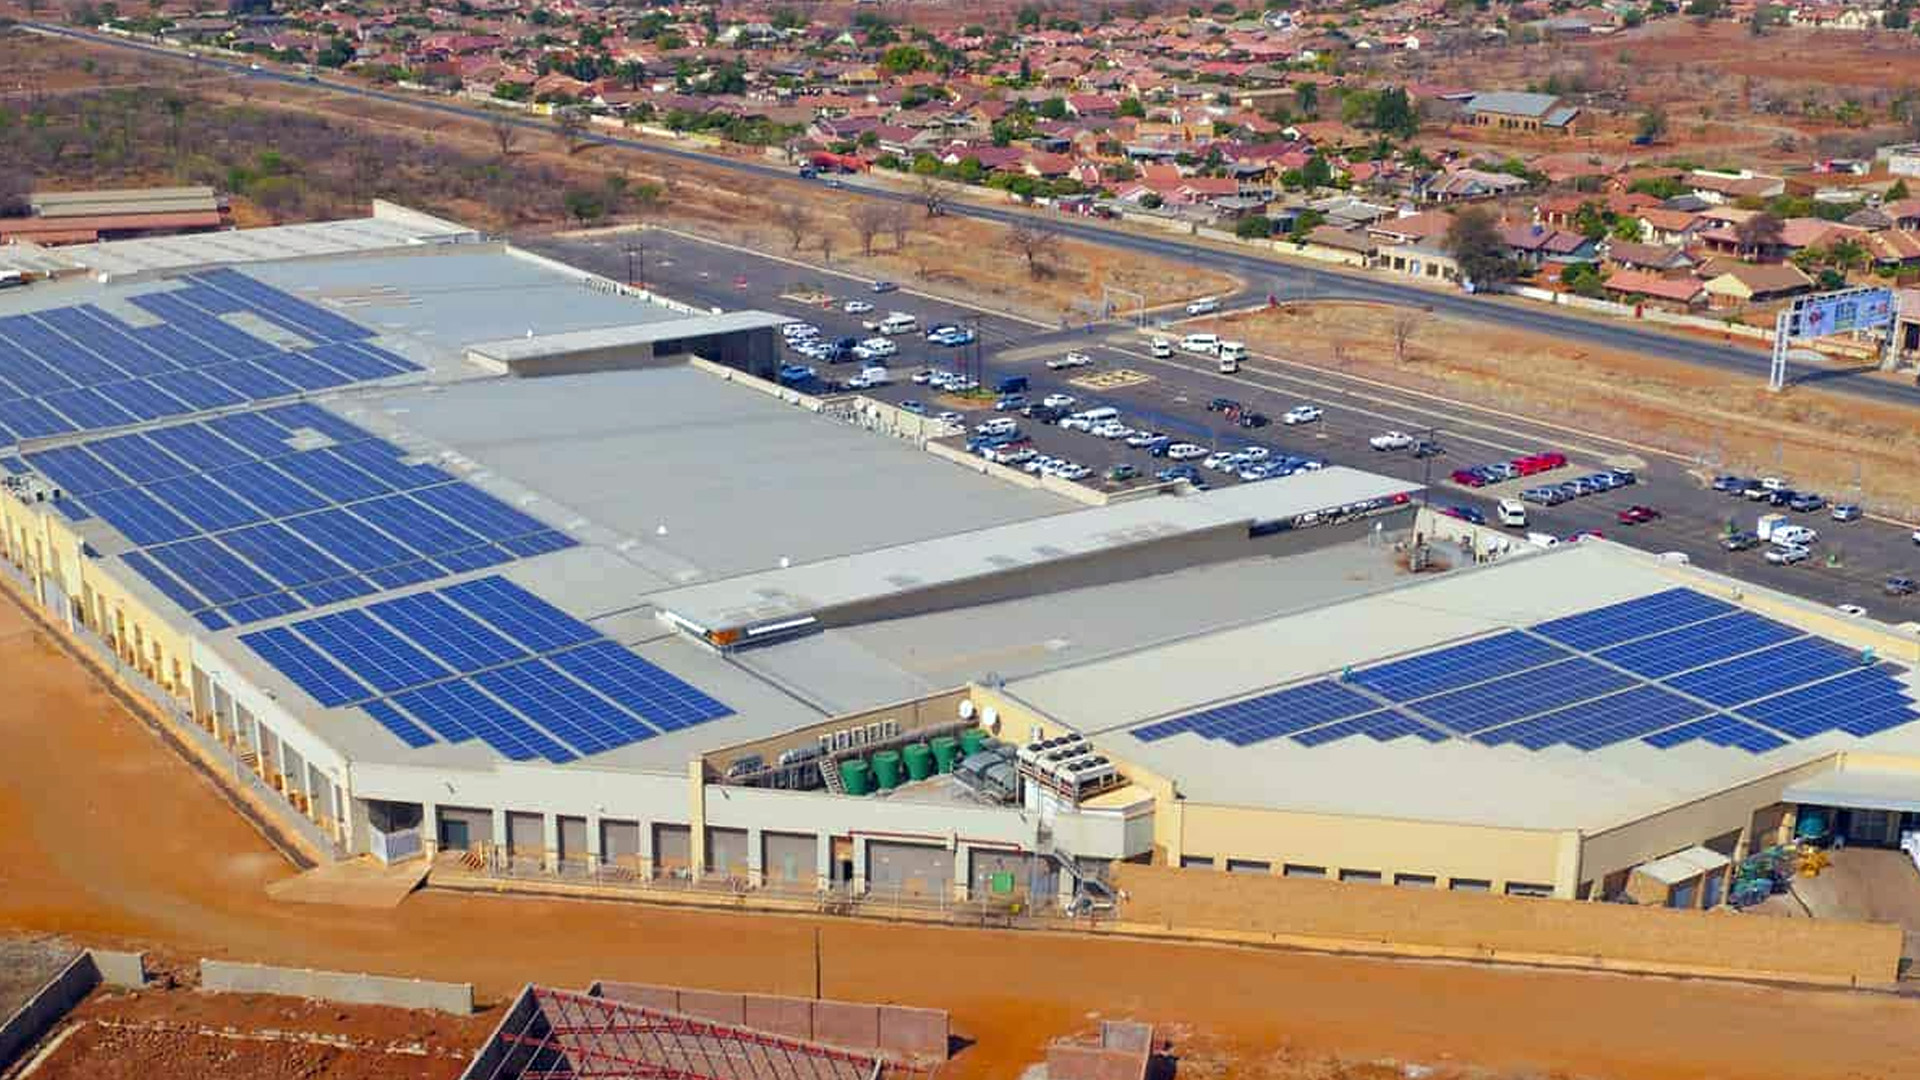 designer pool covers An aerial view of a building with solar panels on the roof, also featuring pool covers.